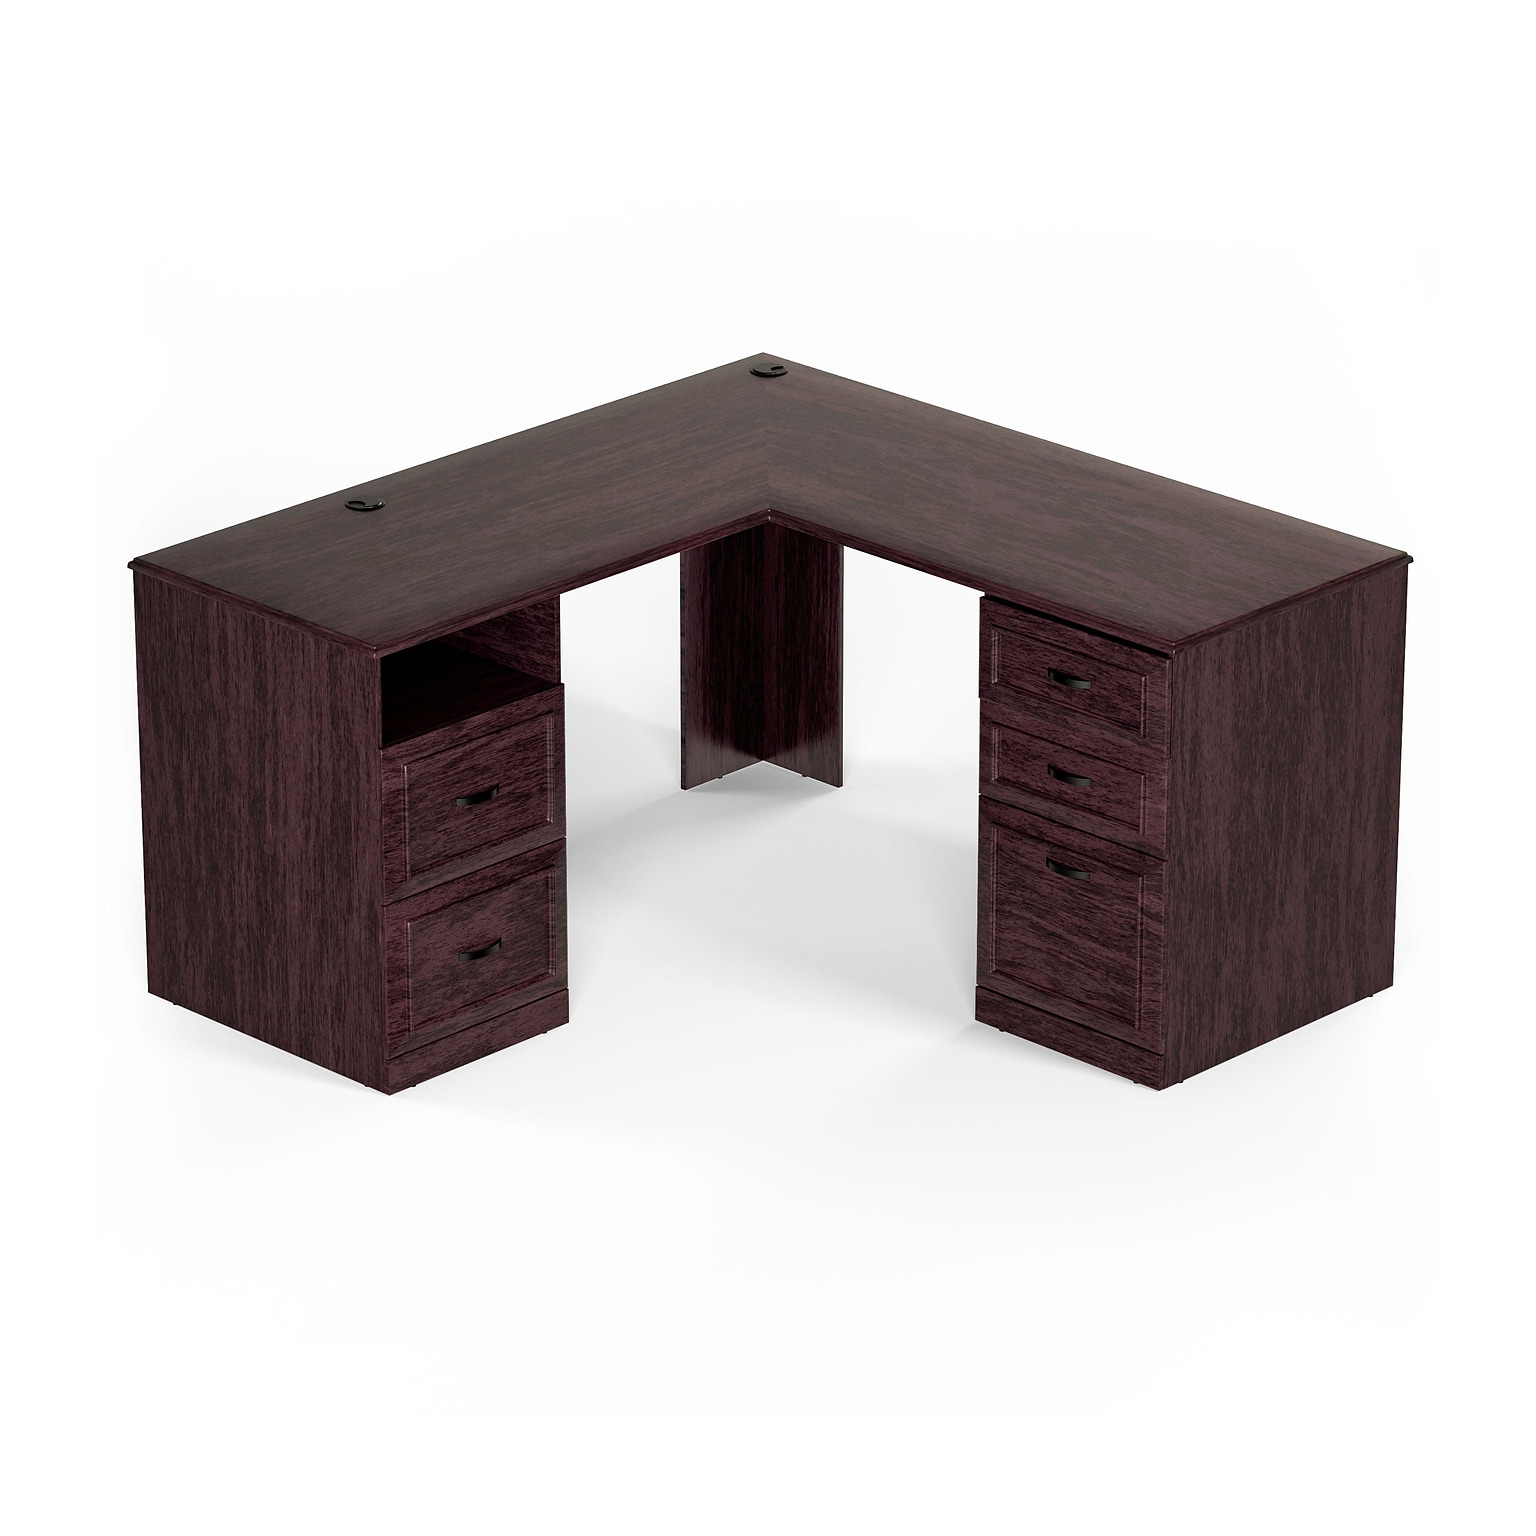 Quill Brand® Kendall Park 59W L-Shaped Desk, Cherry (52493)